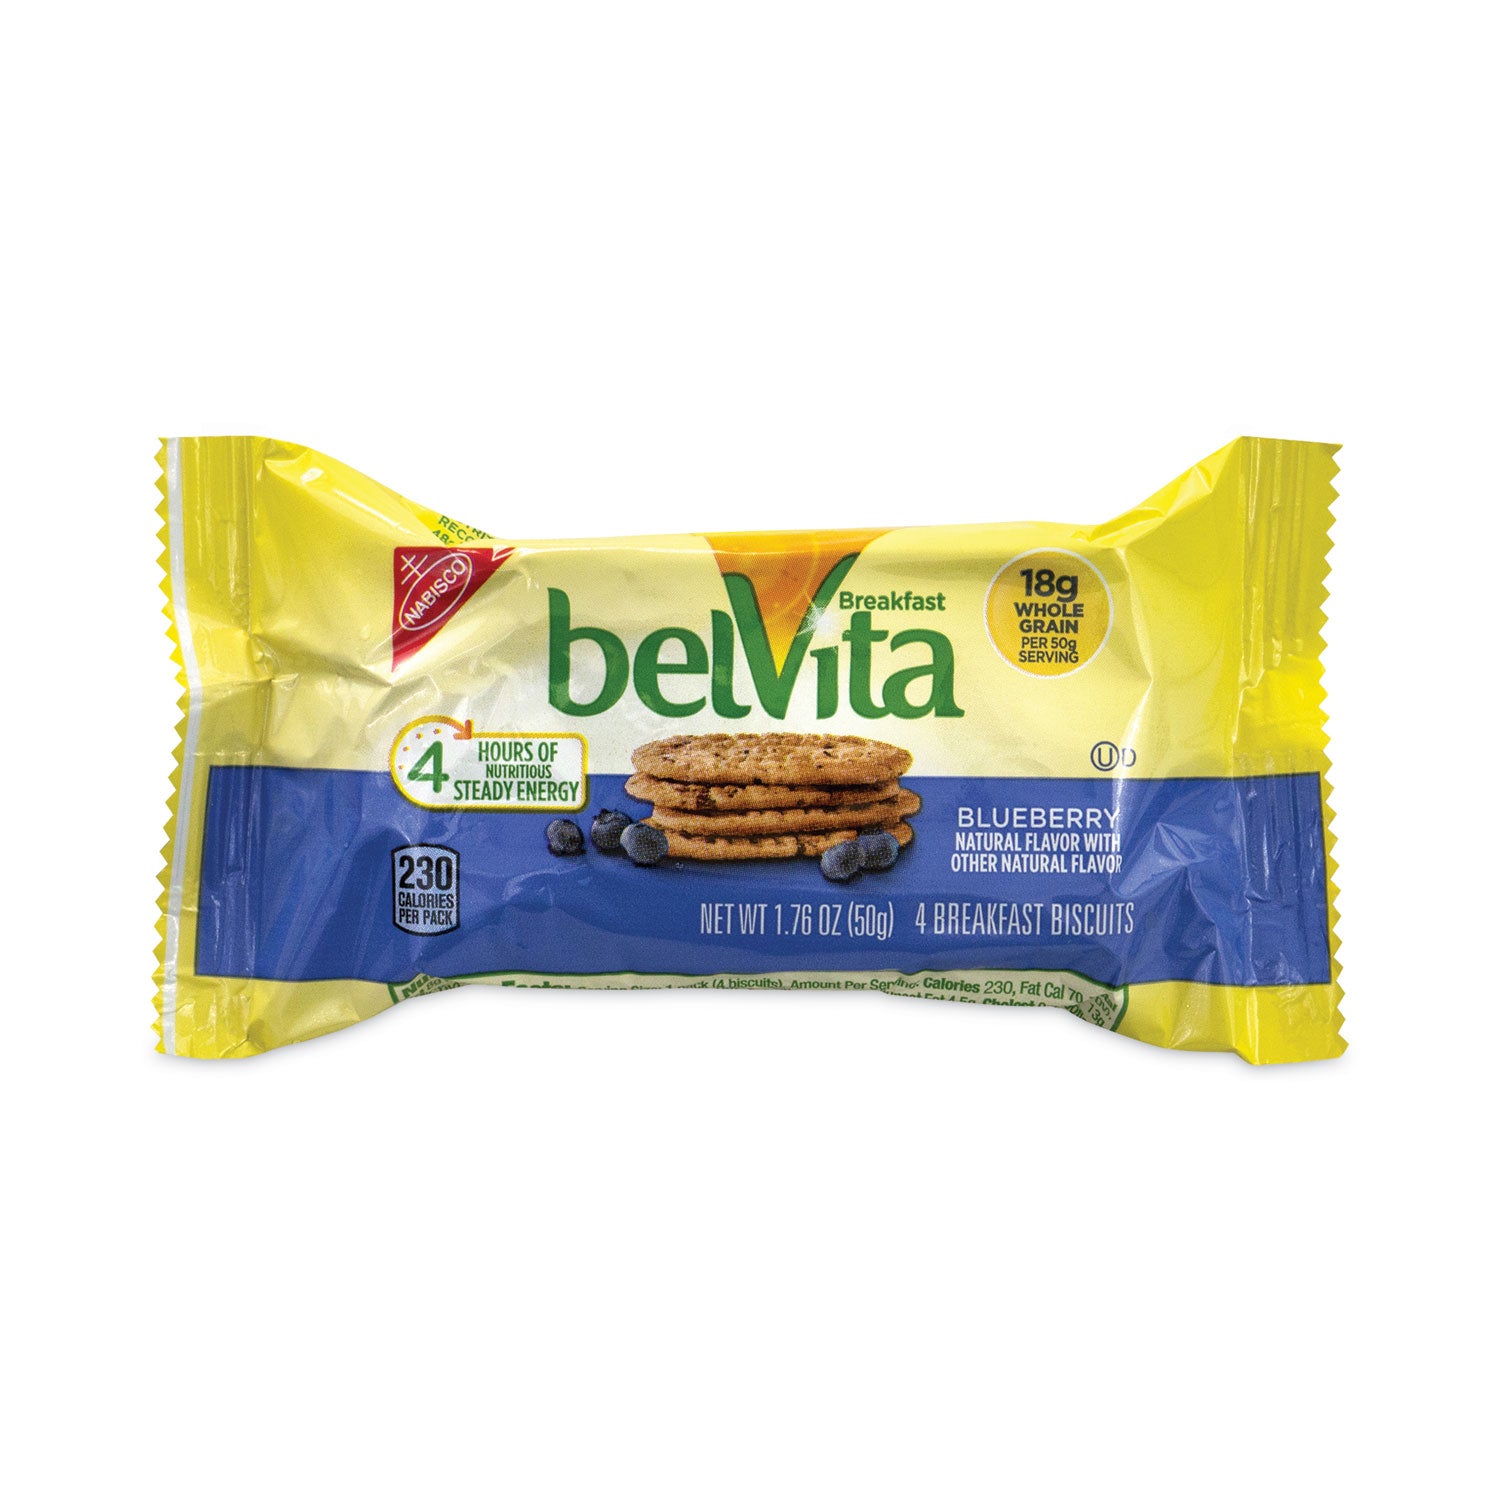 belvita-breakfast-biscuits-blueberry-176-oz-pack-25-packs-carton-ships-in-1-3-business-days_grr22000506 - 1